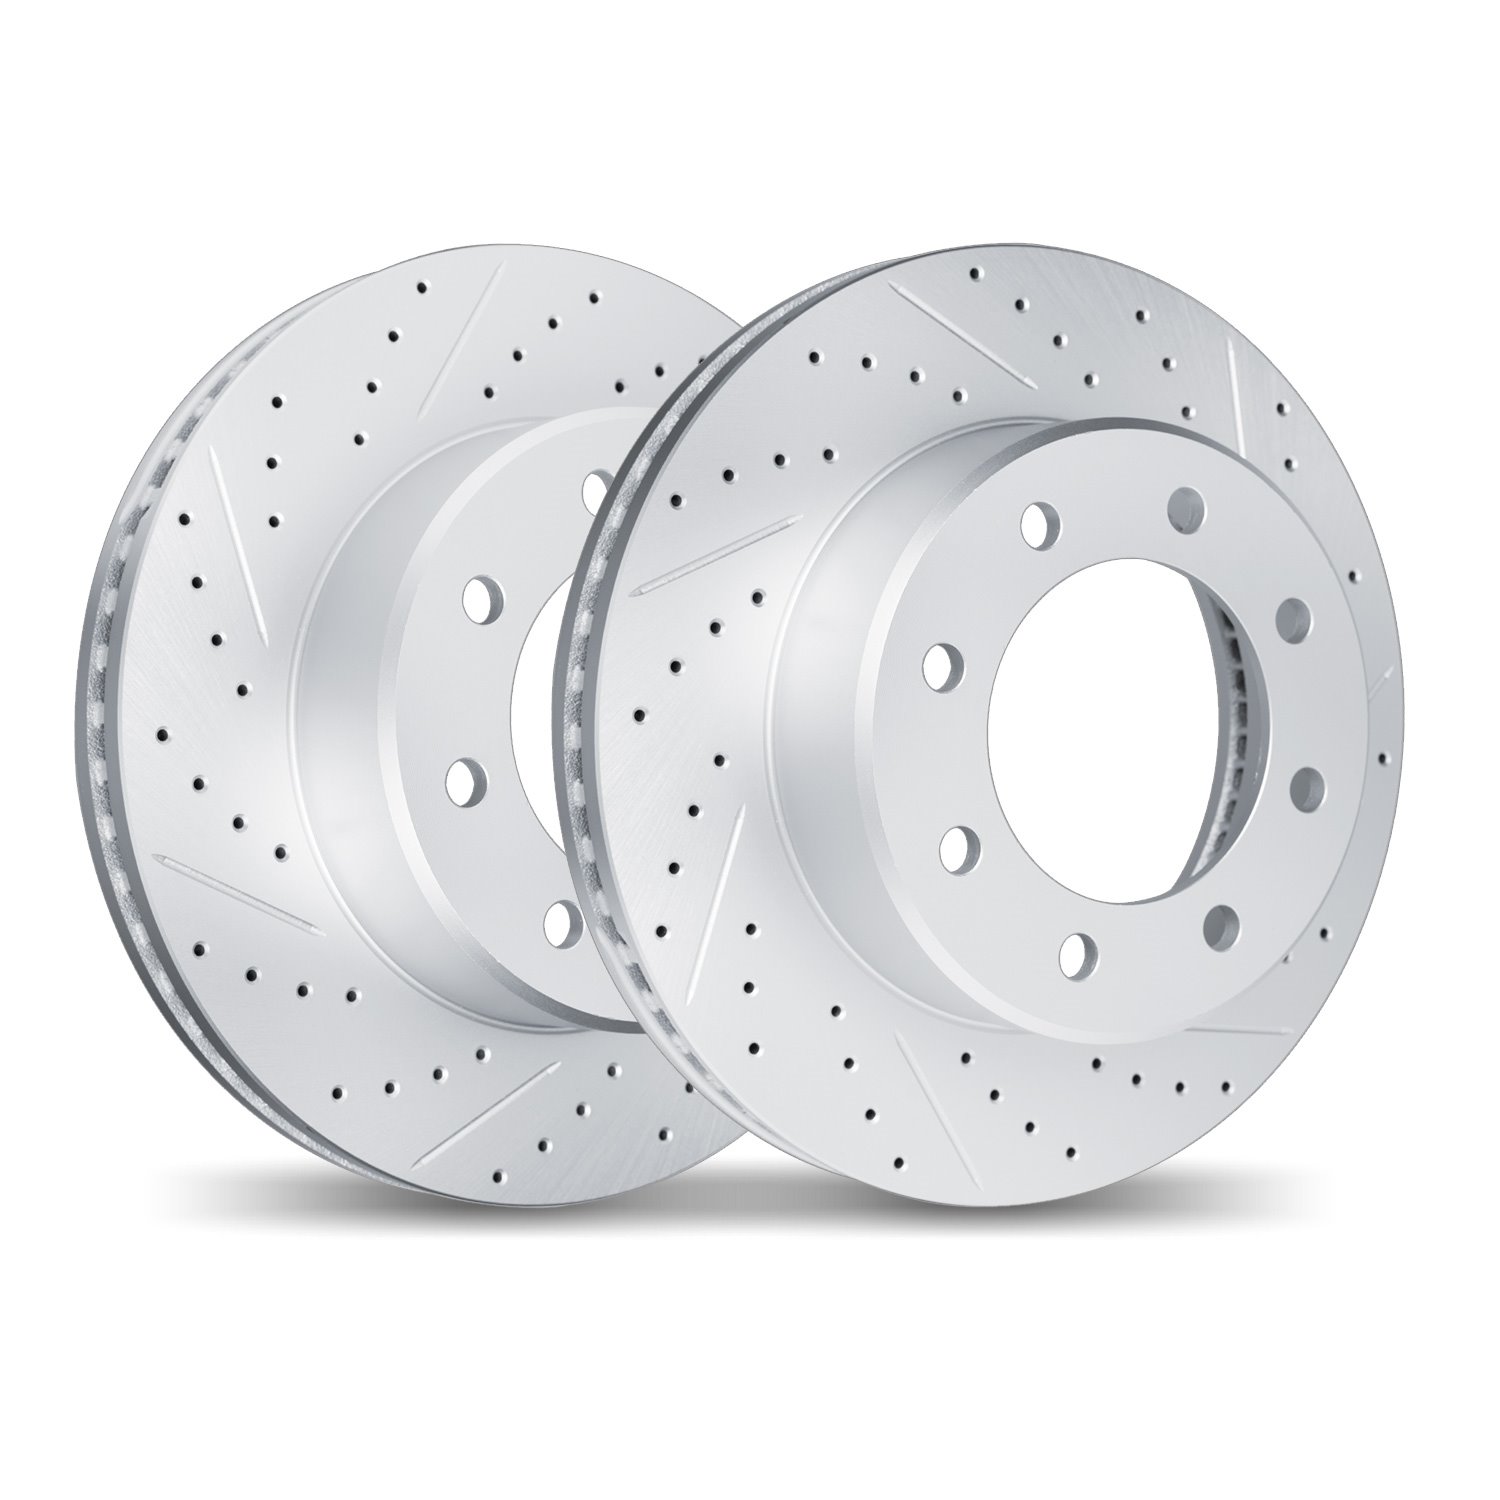 2002-46017 Geoperformance Drilled/Slotted Brake Rotors, 2006-2011 GM, Position: Front